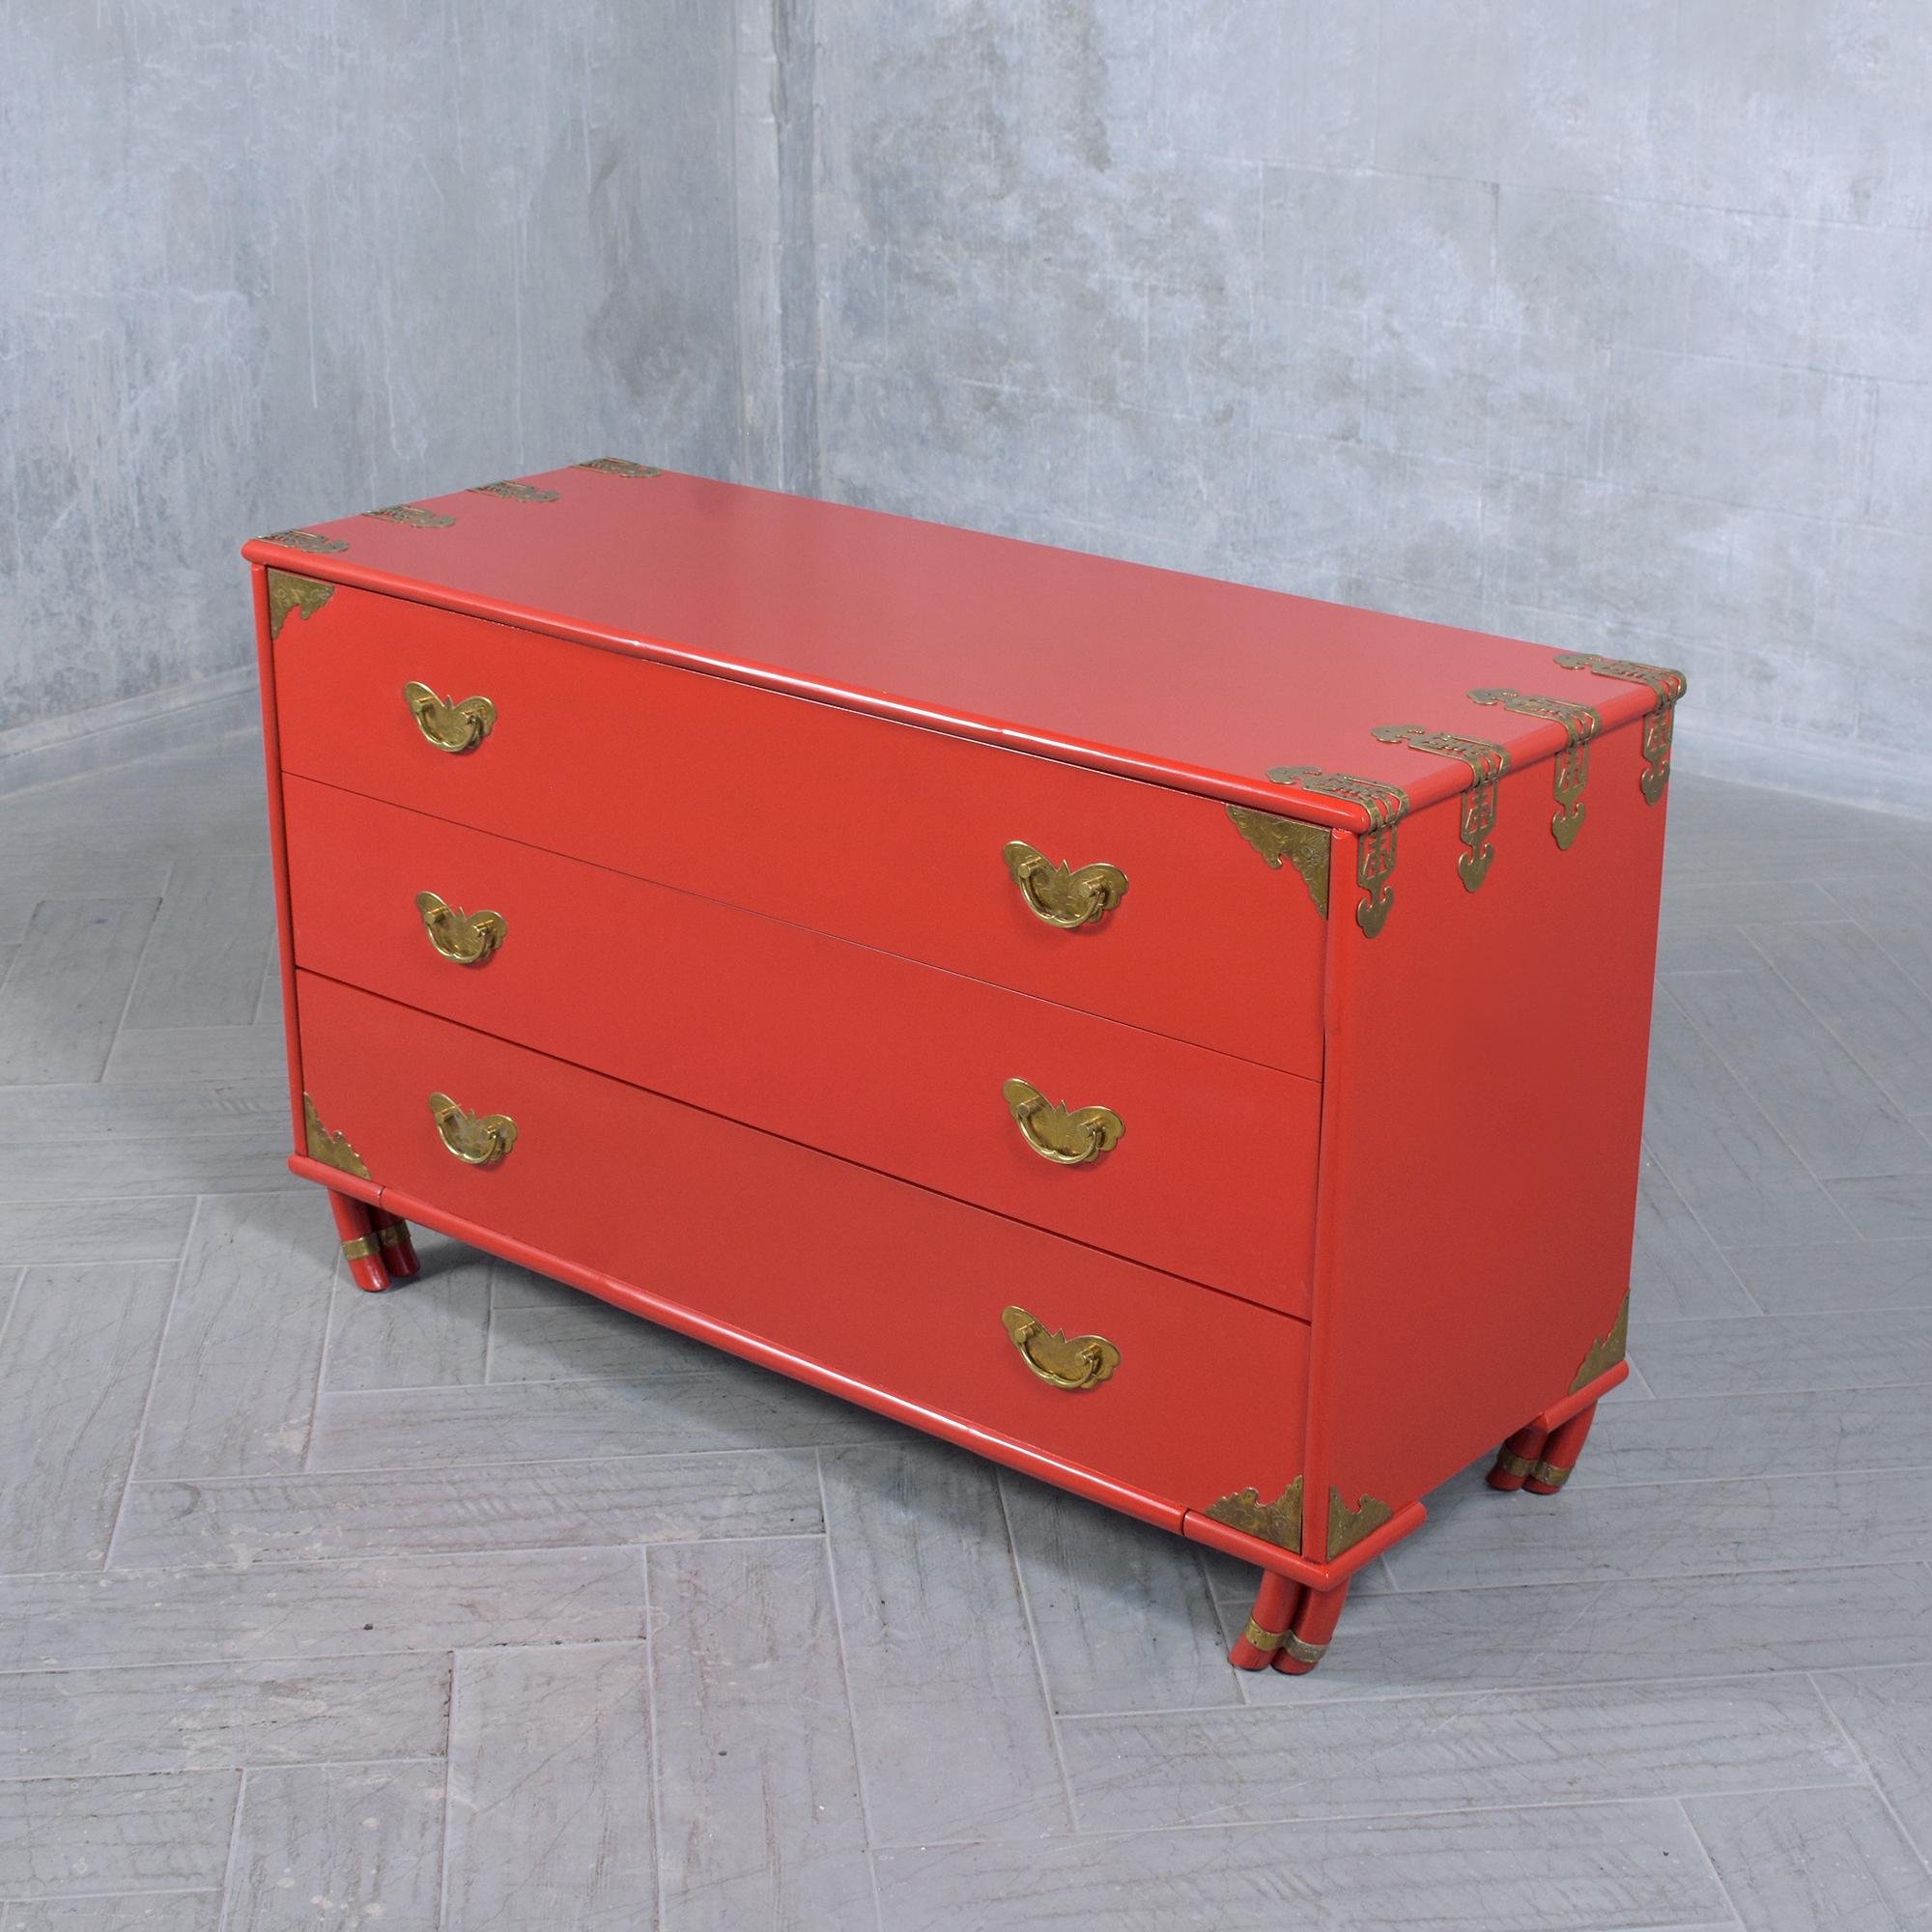 Chinese Export Stunning Vintage 1970s Red Lacquered Chest of Drawers with Brass Accents